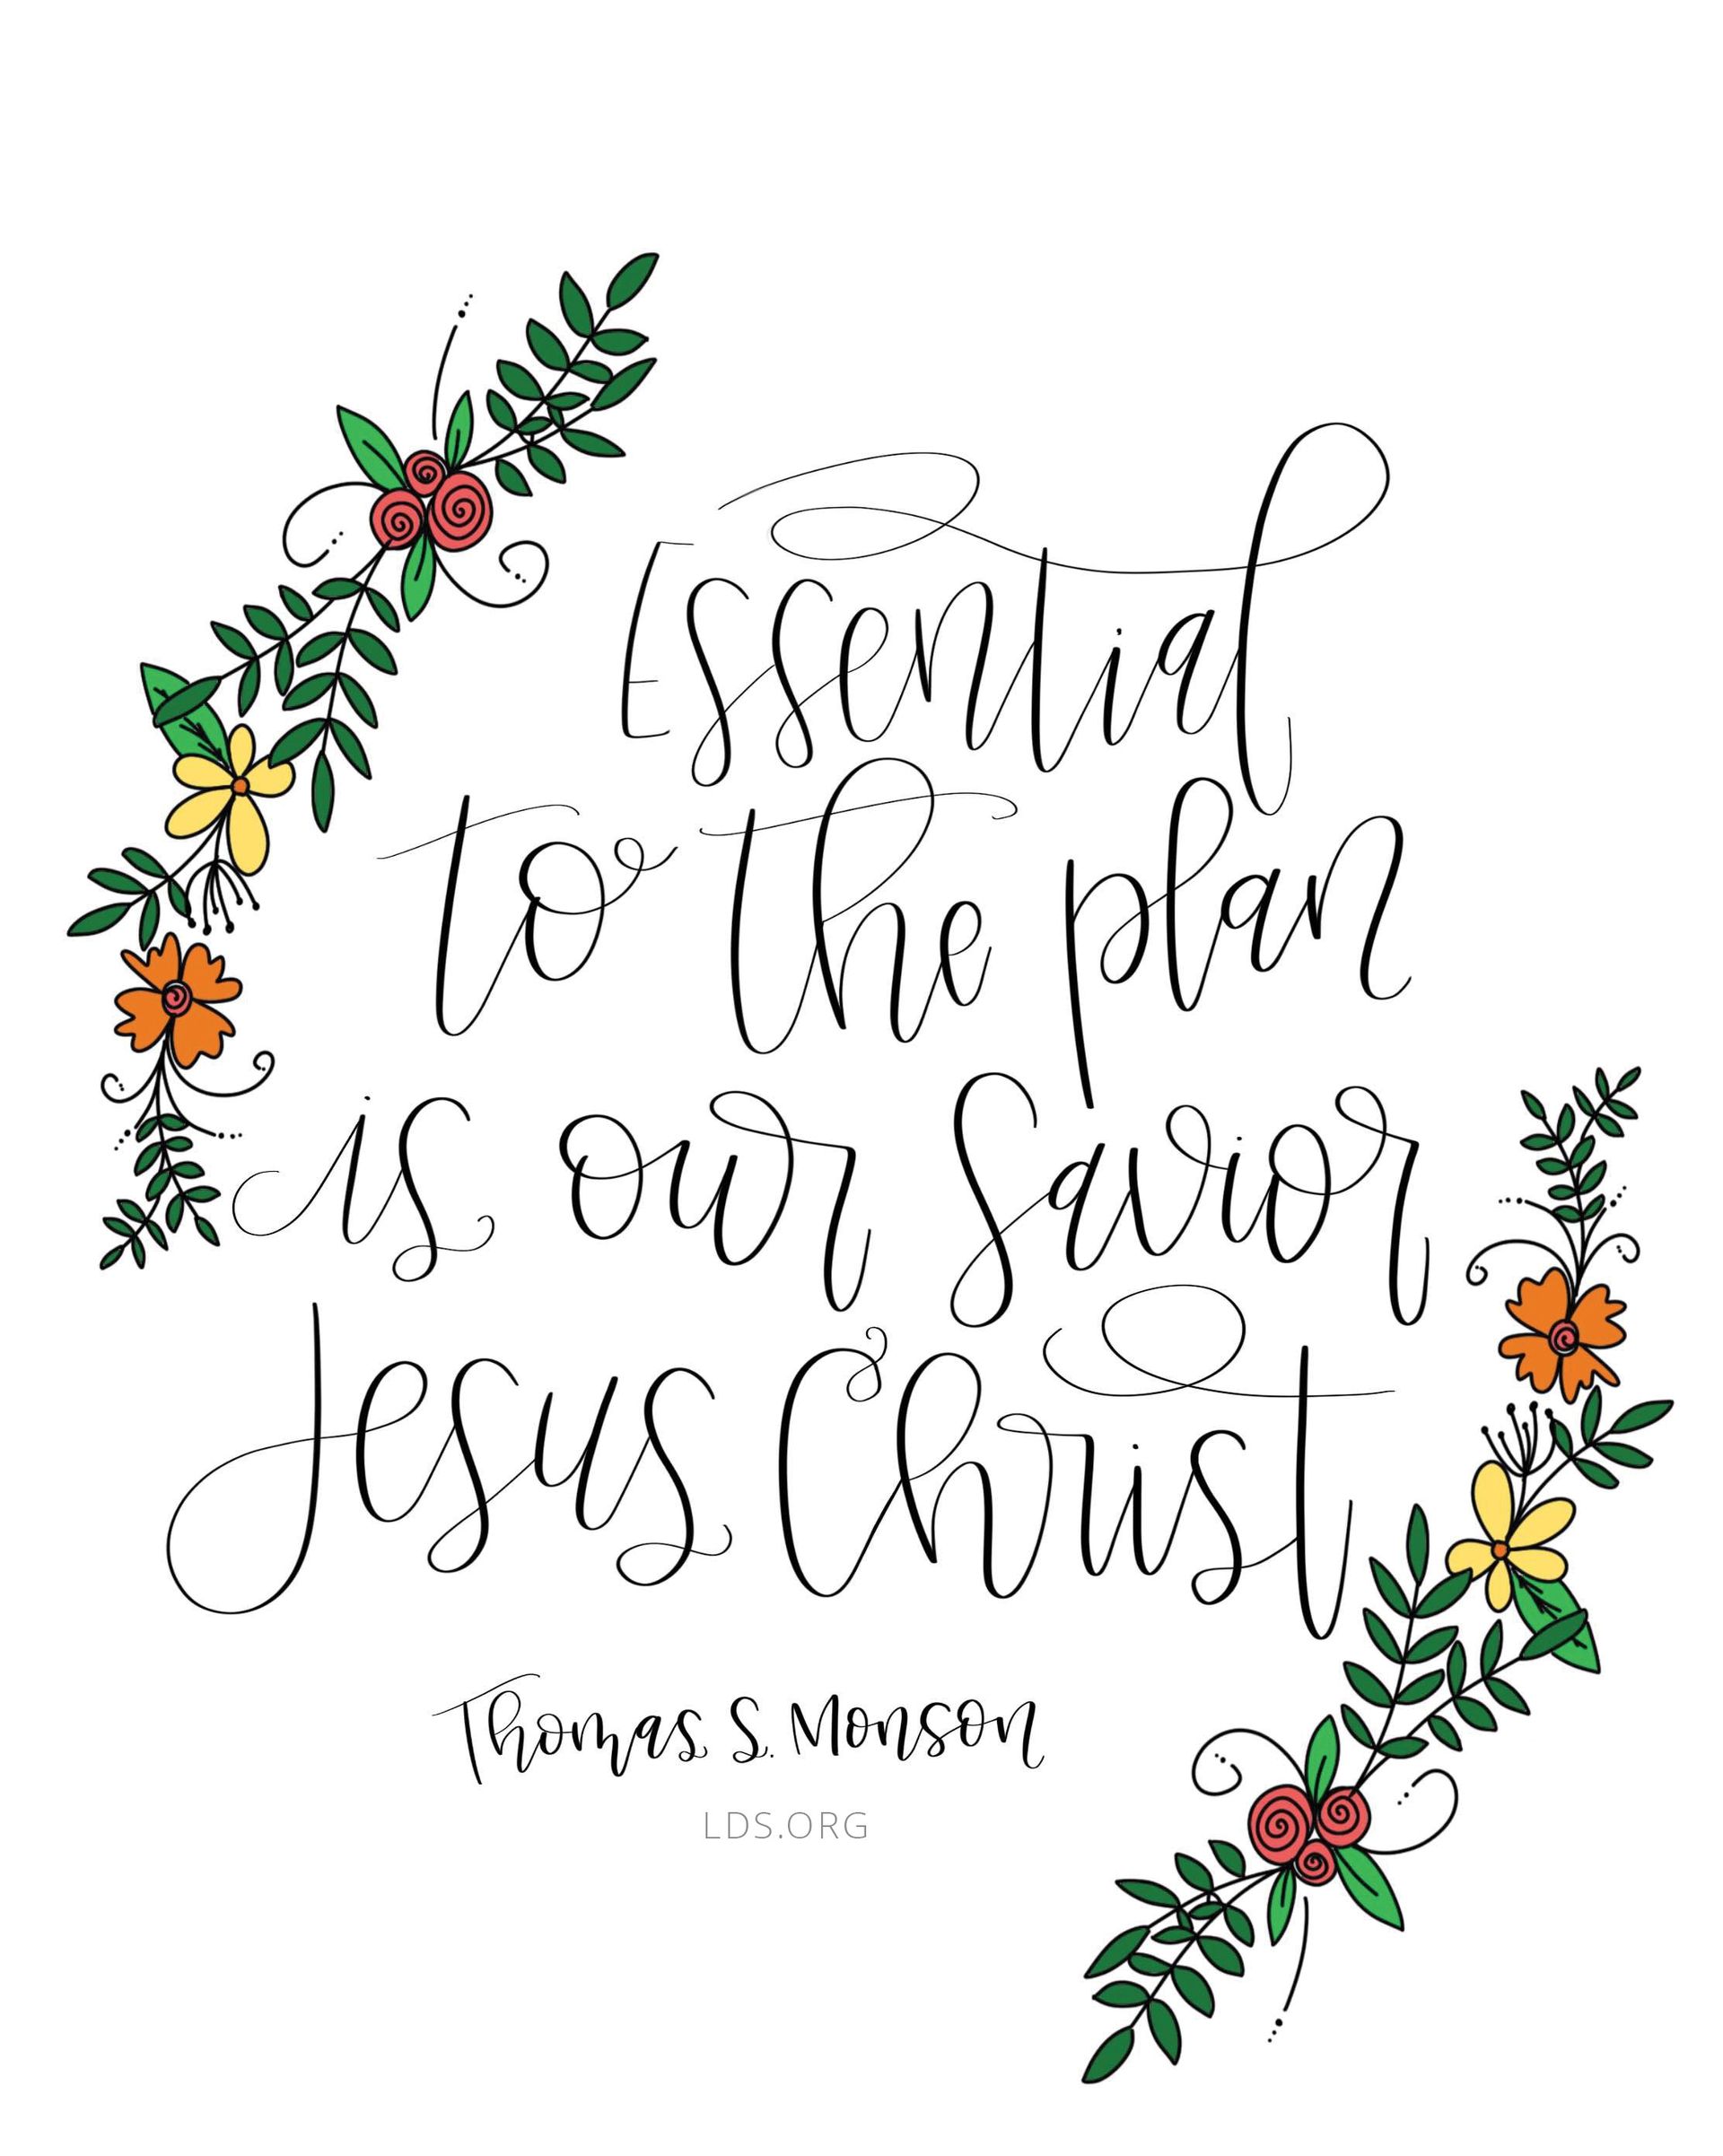 “Essential to the plan is our Savior Jesus Christ.”—President Thomas S. Monson, “The Perfect Path to Happiness” Created by Emily Stanton.